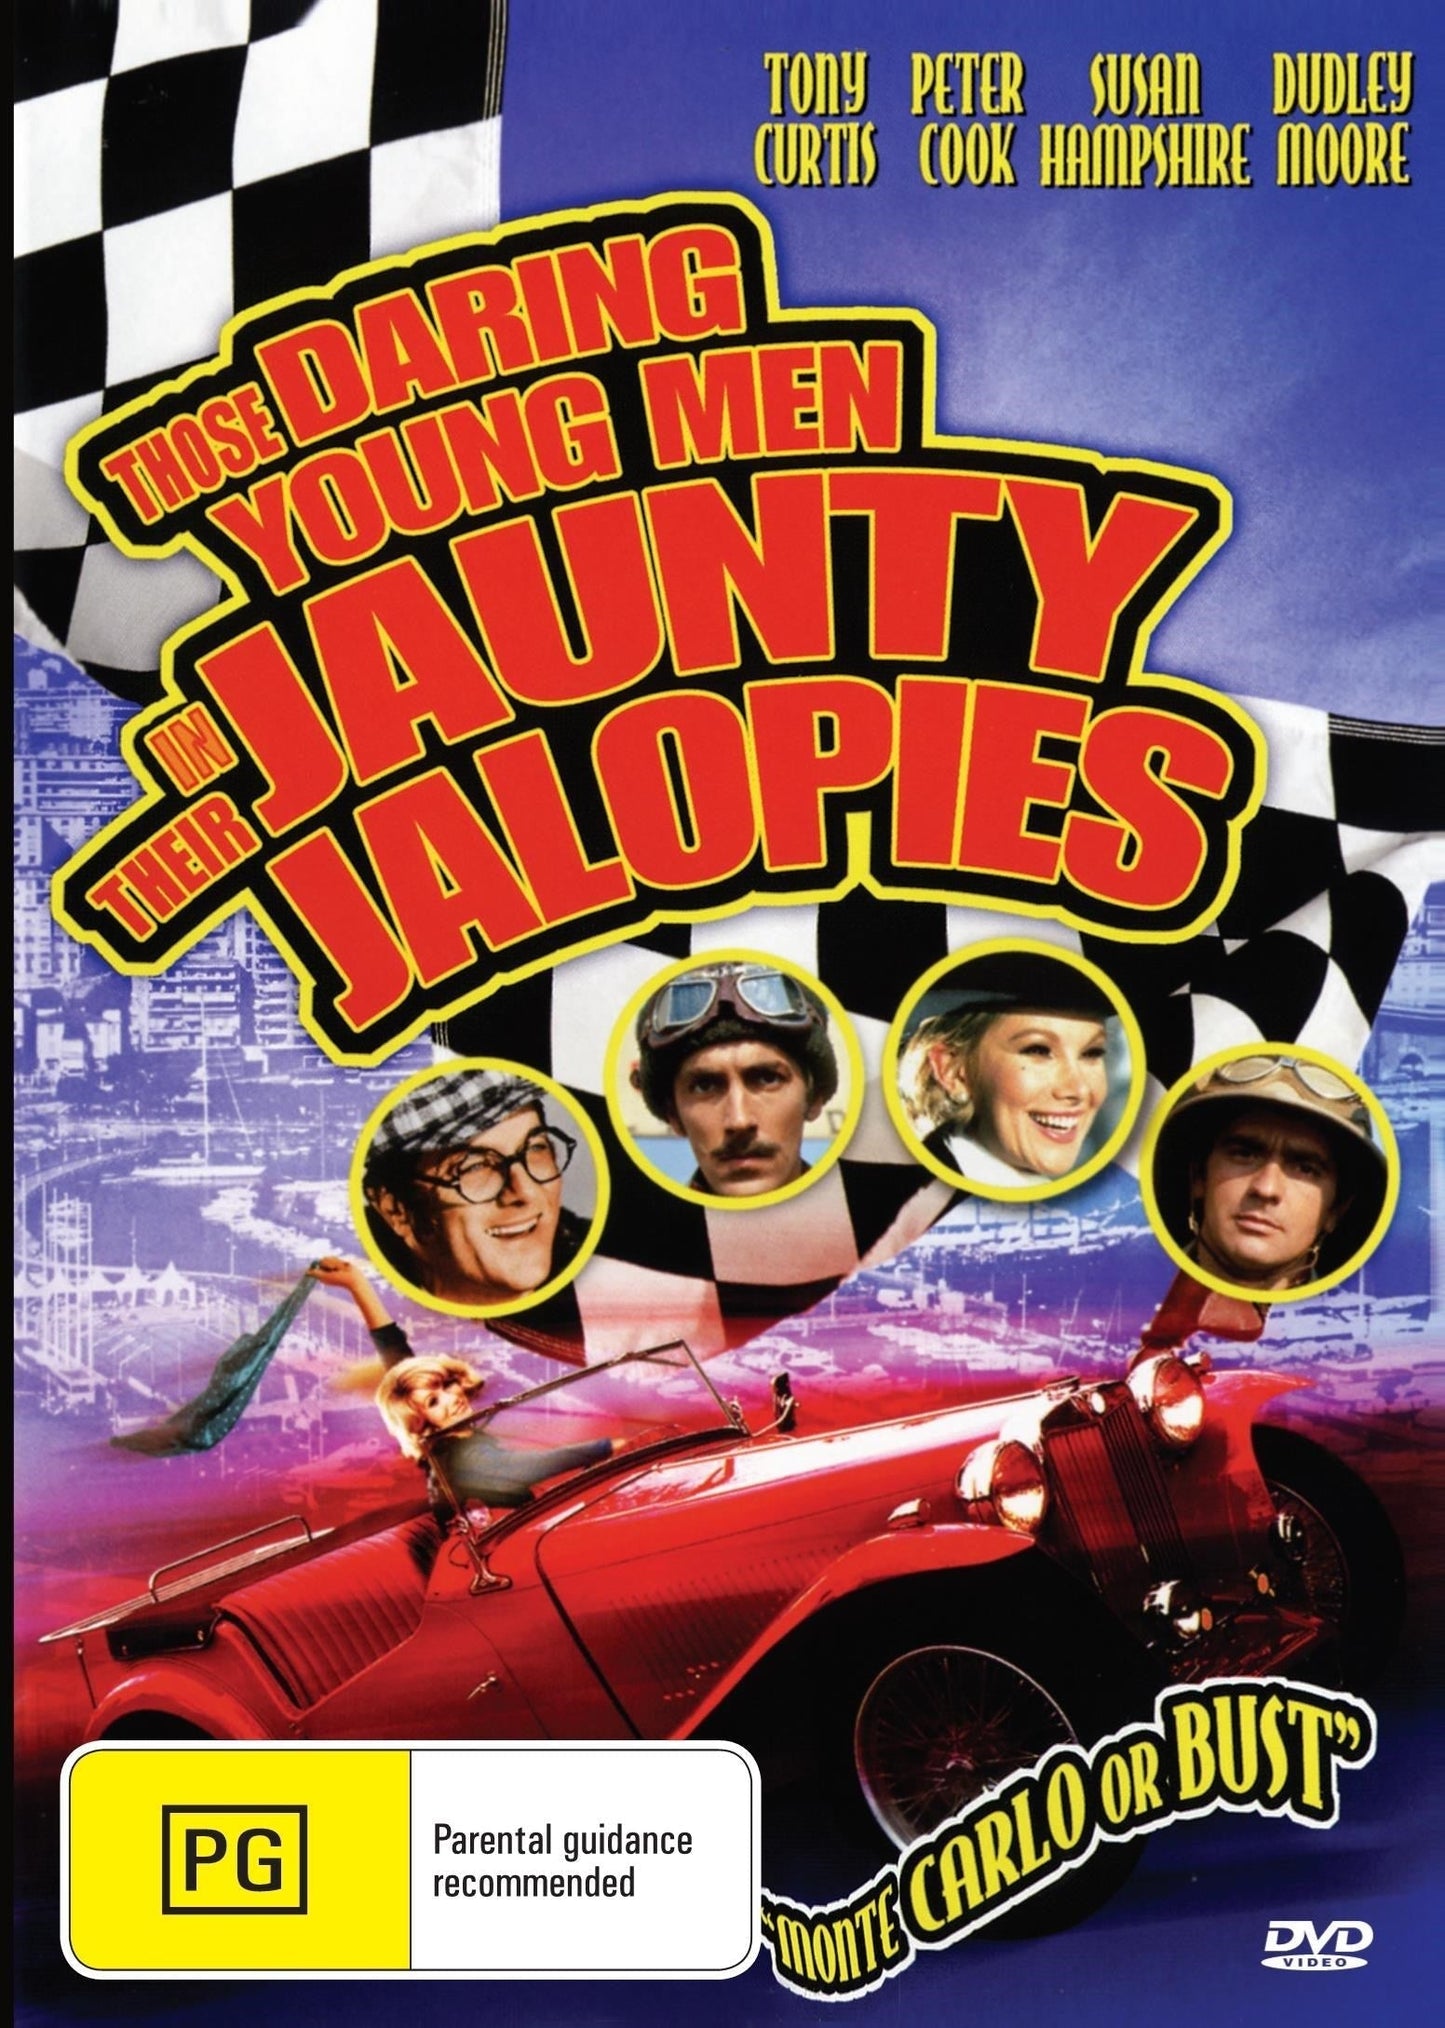 Those Daring Young Men In Their Jaunty Jalopies rareandcollectibledvds